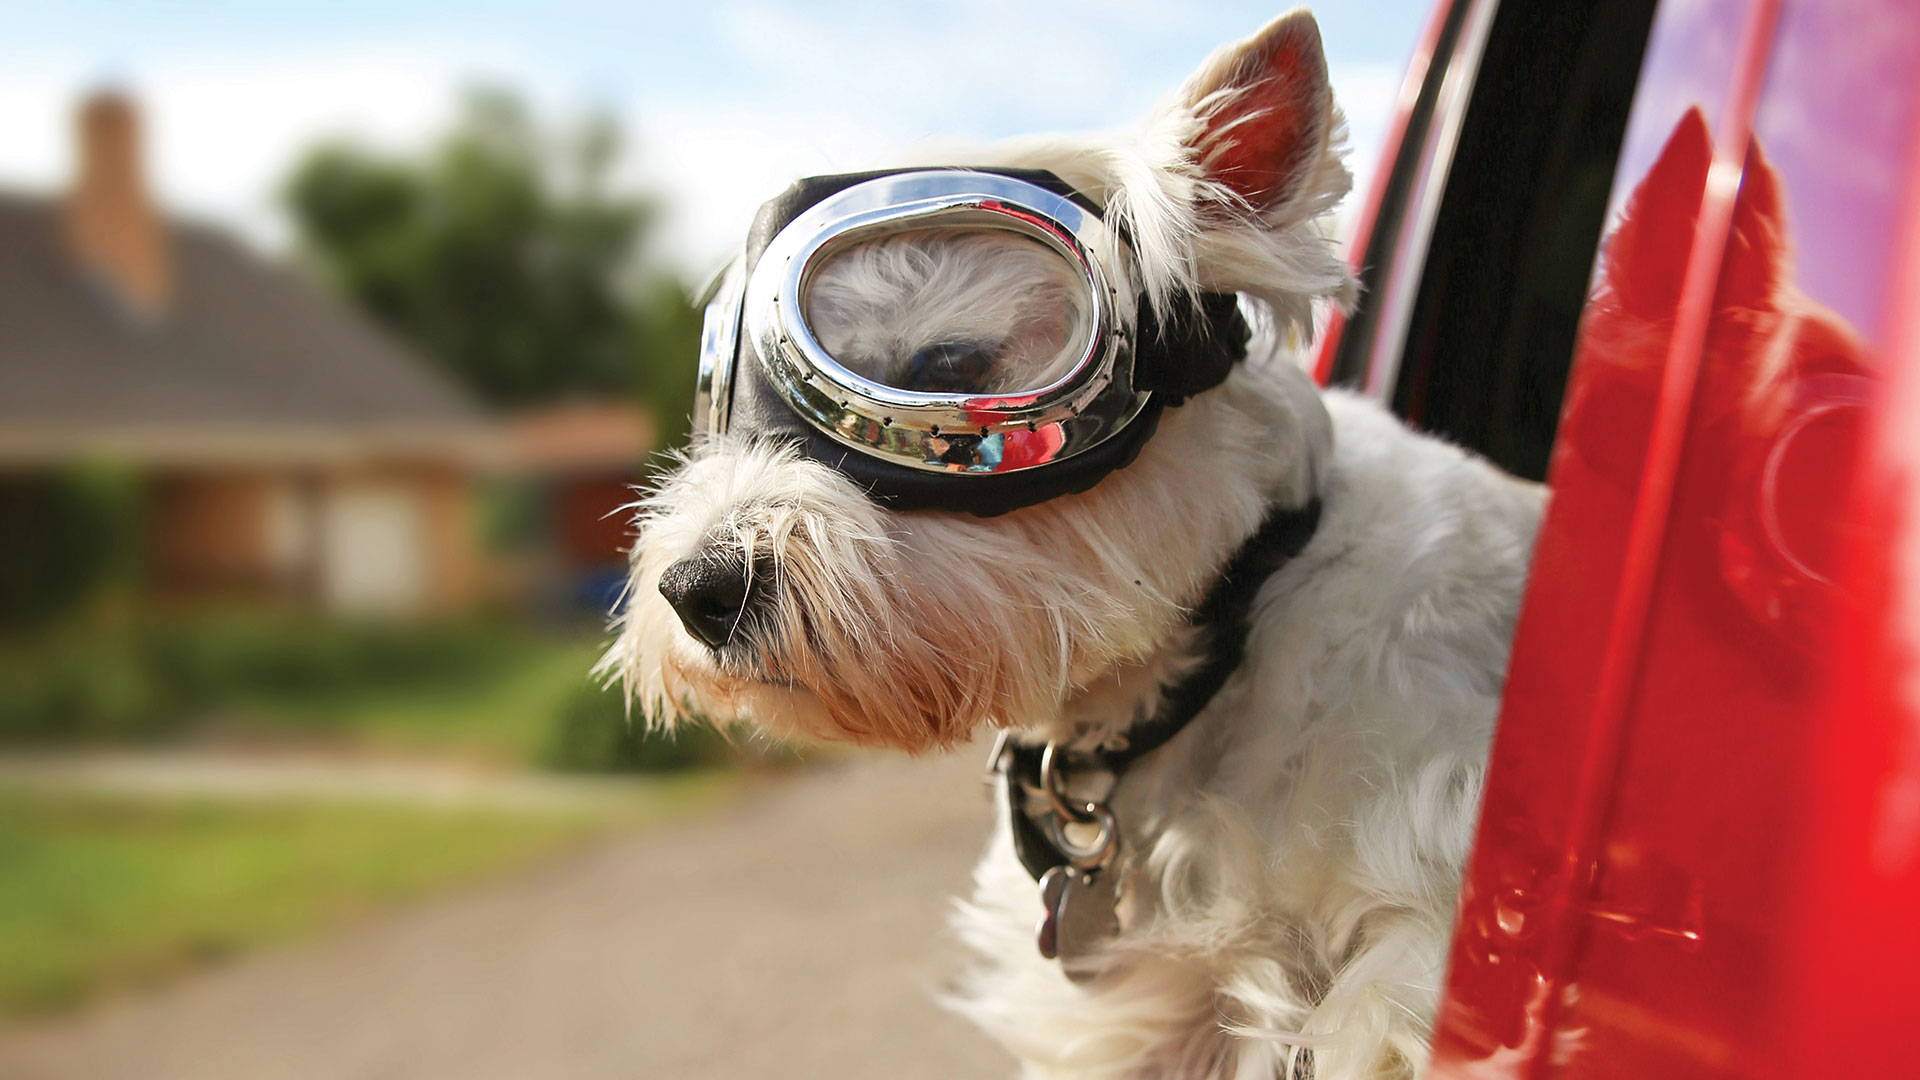 Dog wearing goggles riding in a car